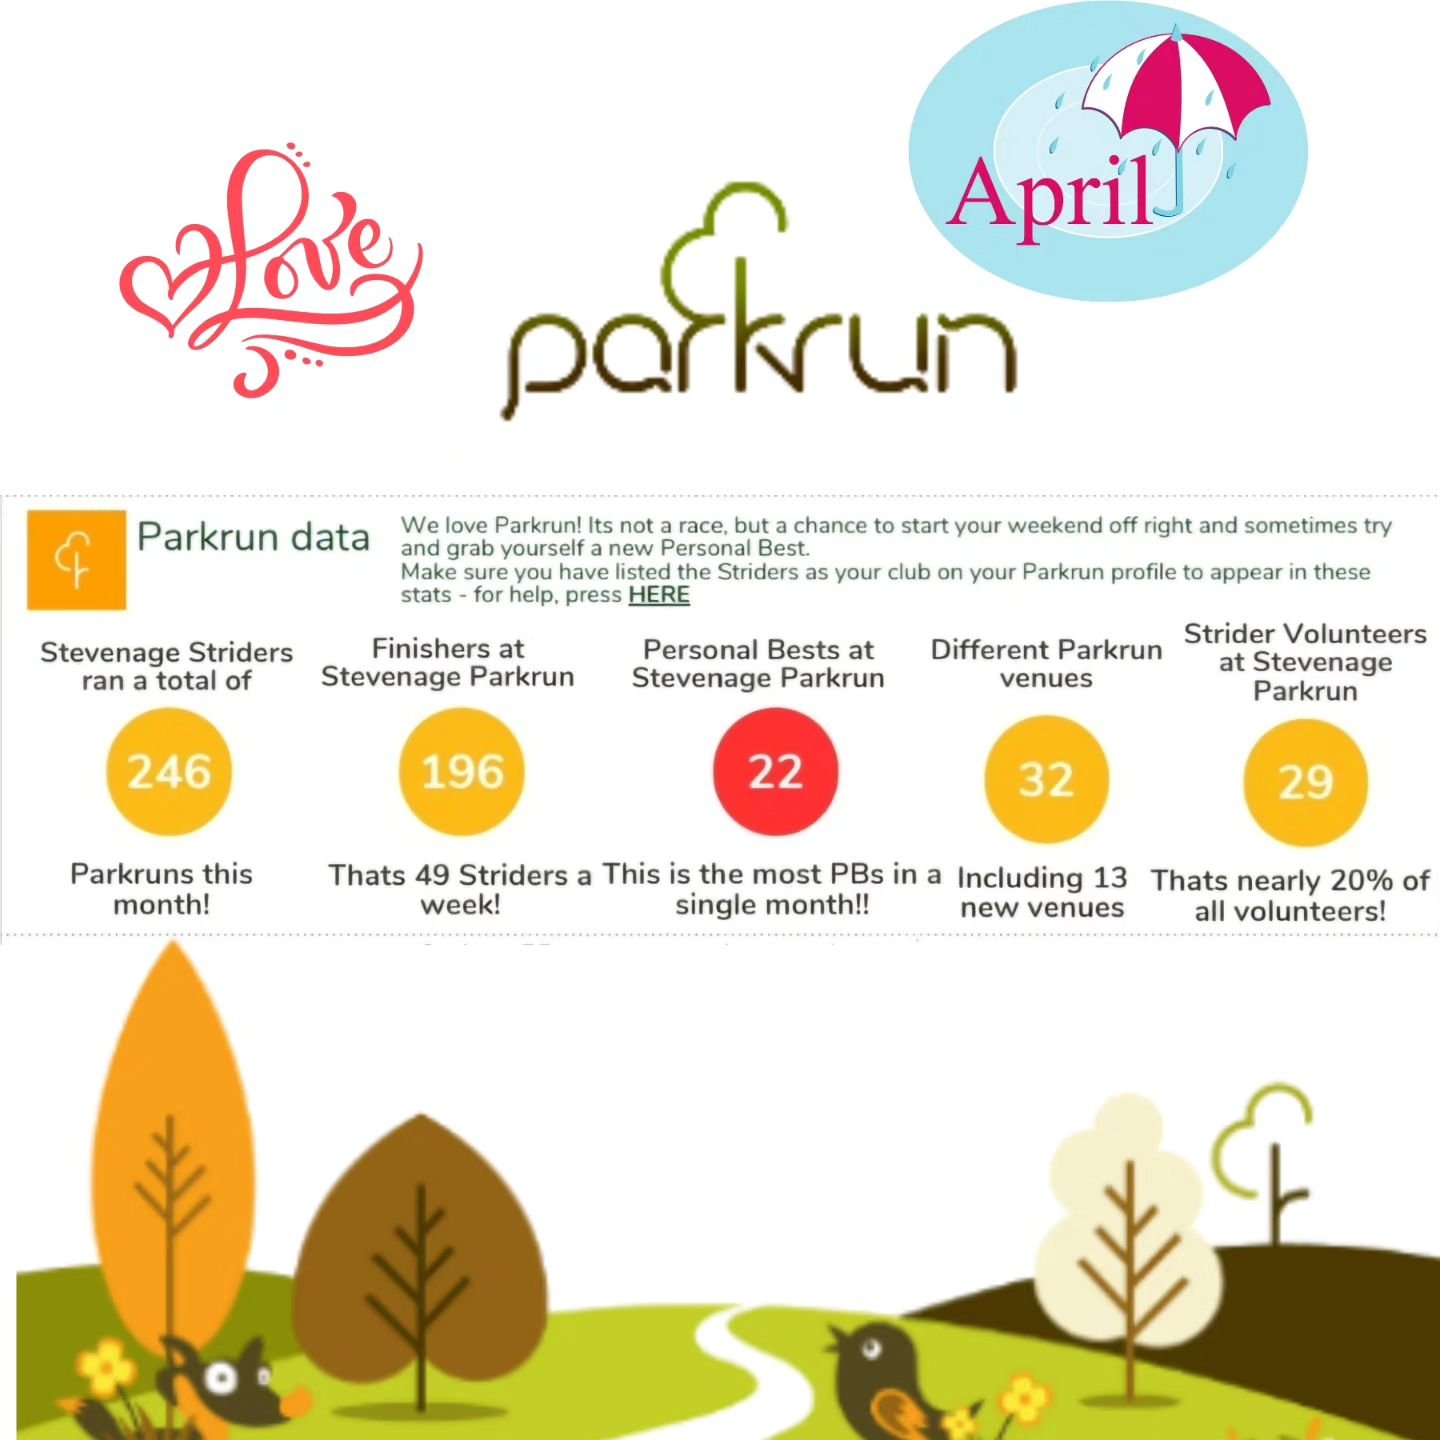 As it's #ParkRunDay just take a look at these amazing April Park Run Stats! 

Did you know we also had....

21 marathon heroes
37 Personal Bests
0-5km graduates 
Our first Ultra and first OCR races of the year!? 

We can't wait to see what the club a